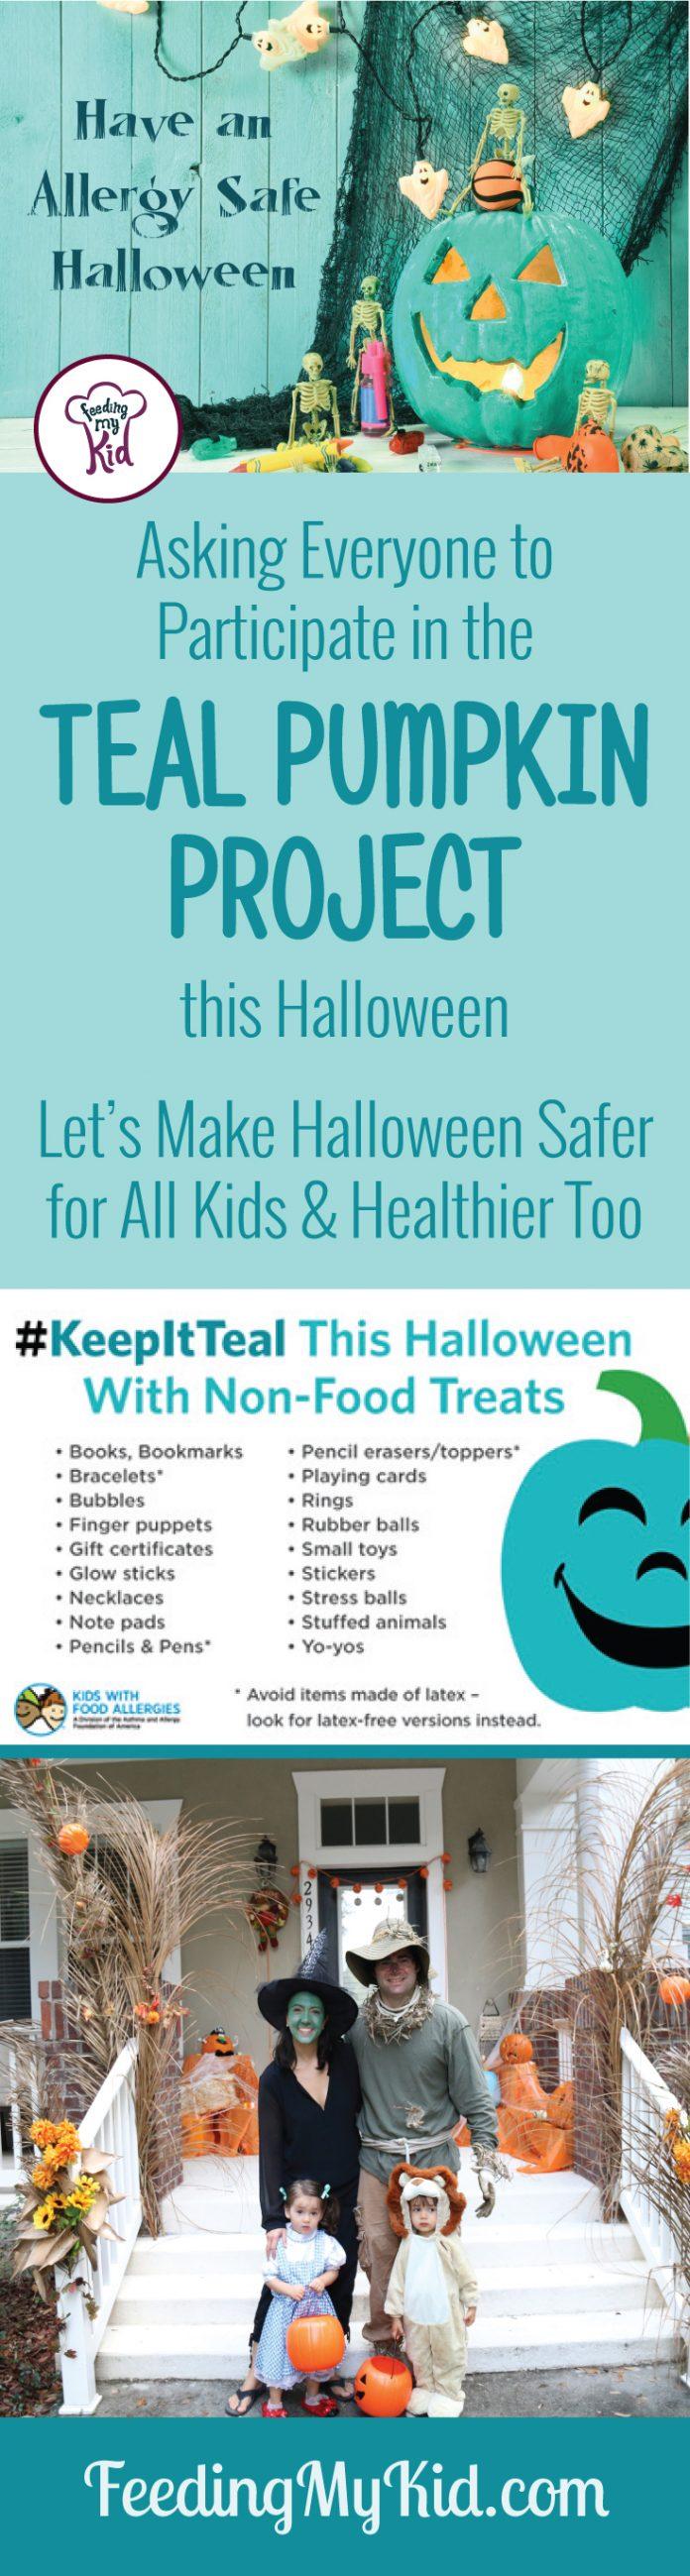 Halloween Treats For Kids: Let's Change How Kids Are Trick Or Treating